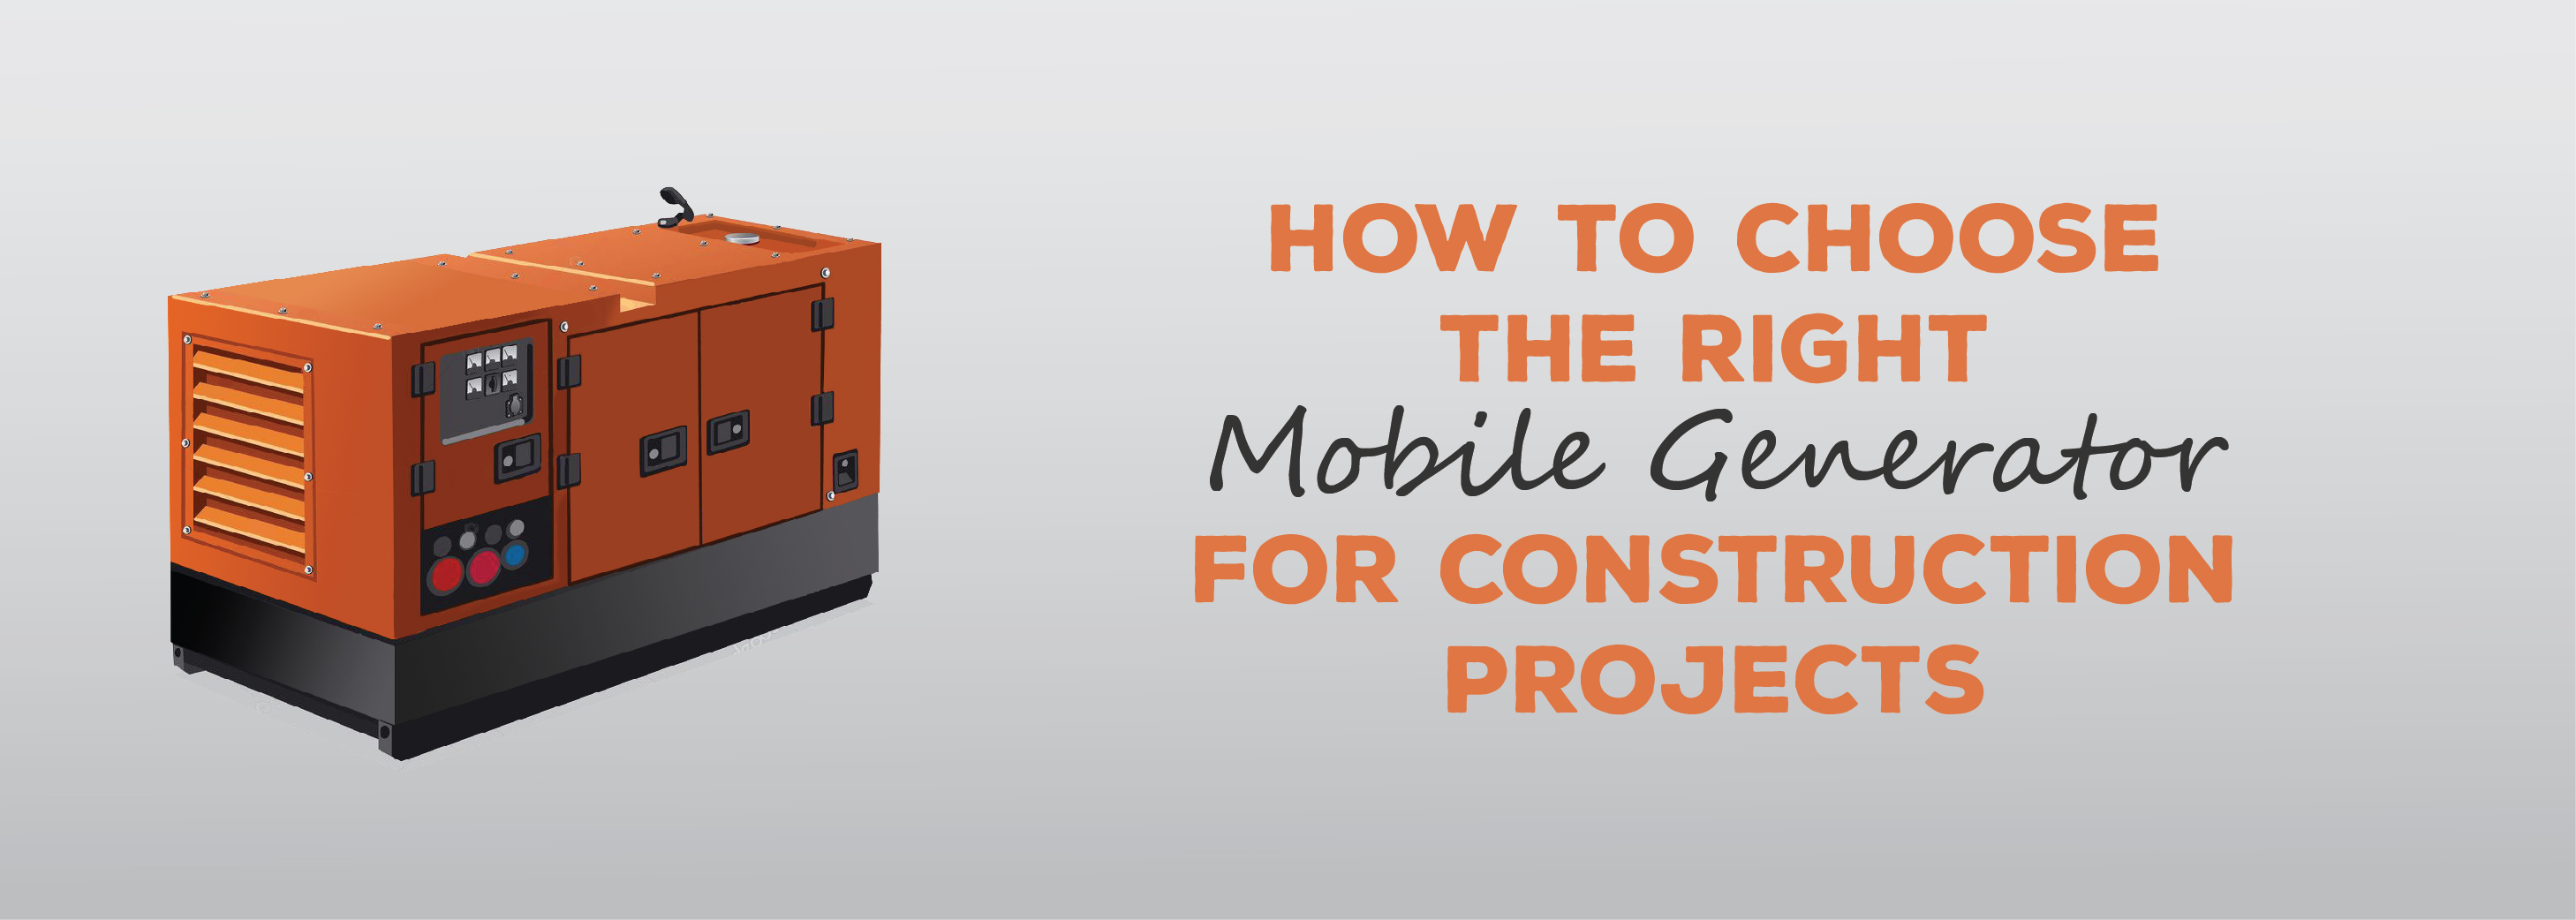 How to Choose the Right Mobile Generator for Construction Projects | ADI Agency | Generator Warranty